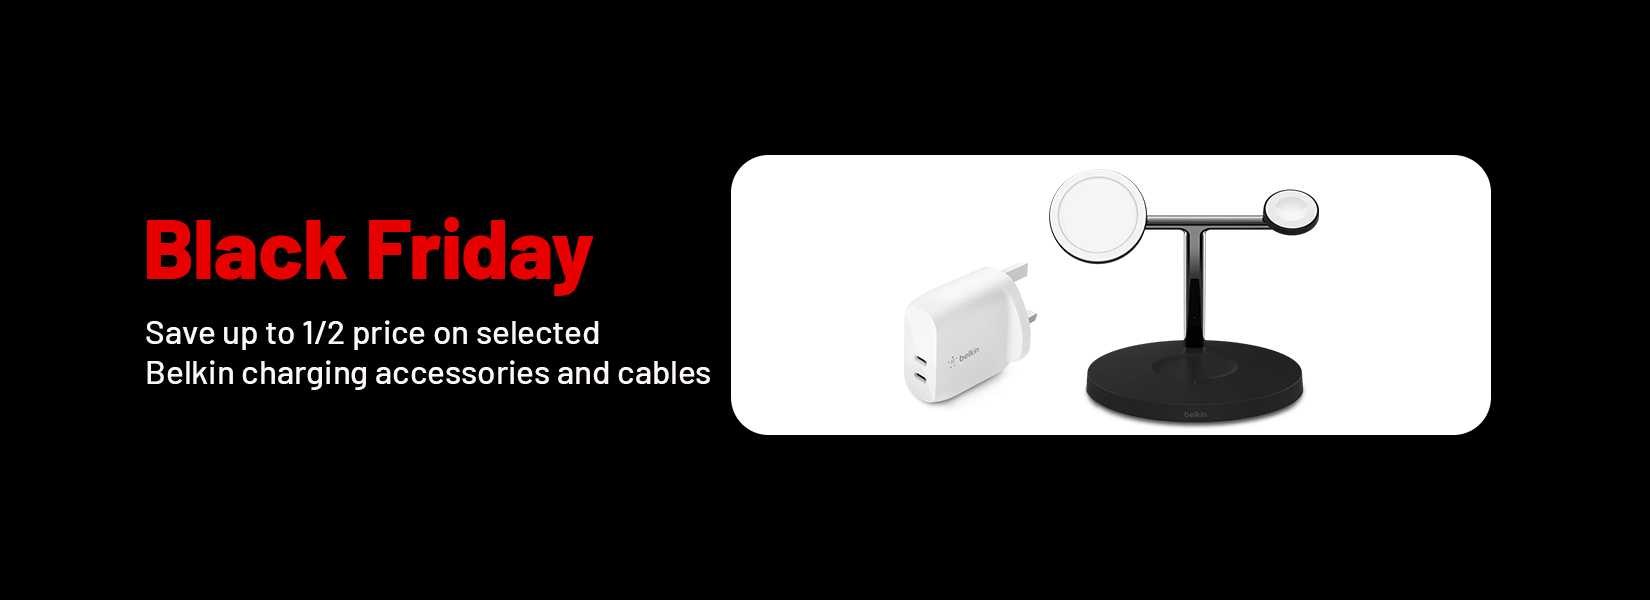 Black Friday. Save up to 1/2 price on selected Belkin charging accessories and cables.